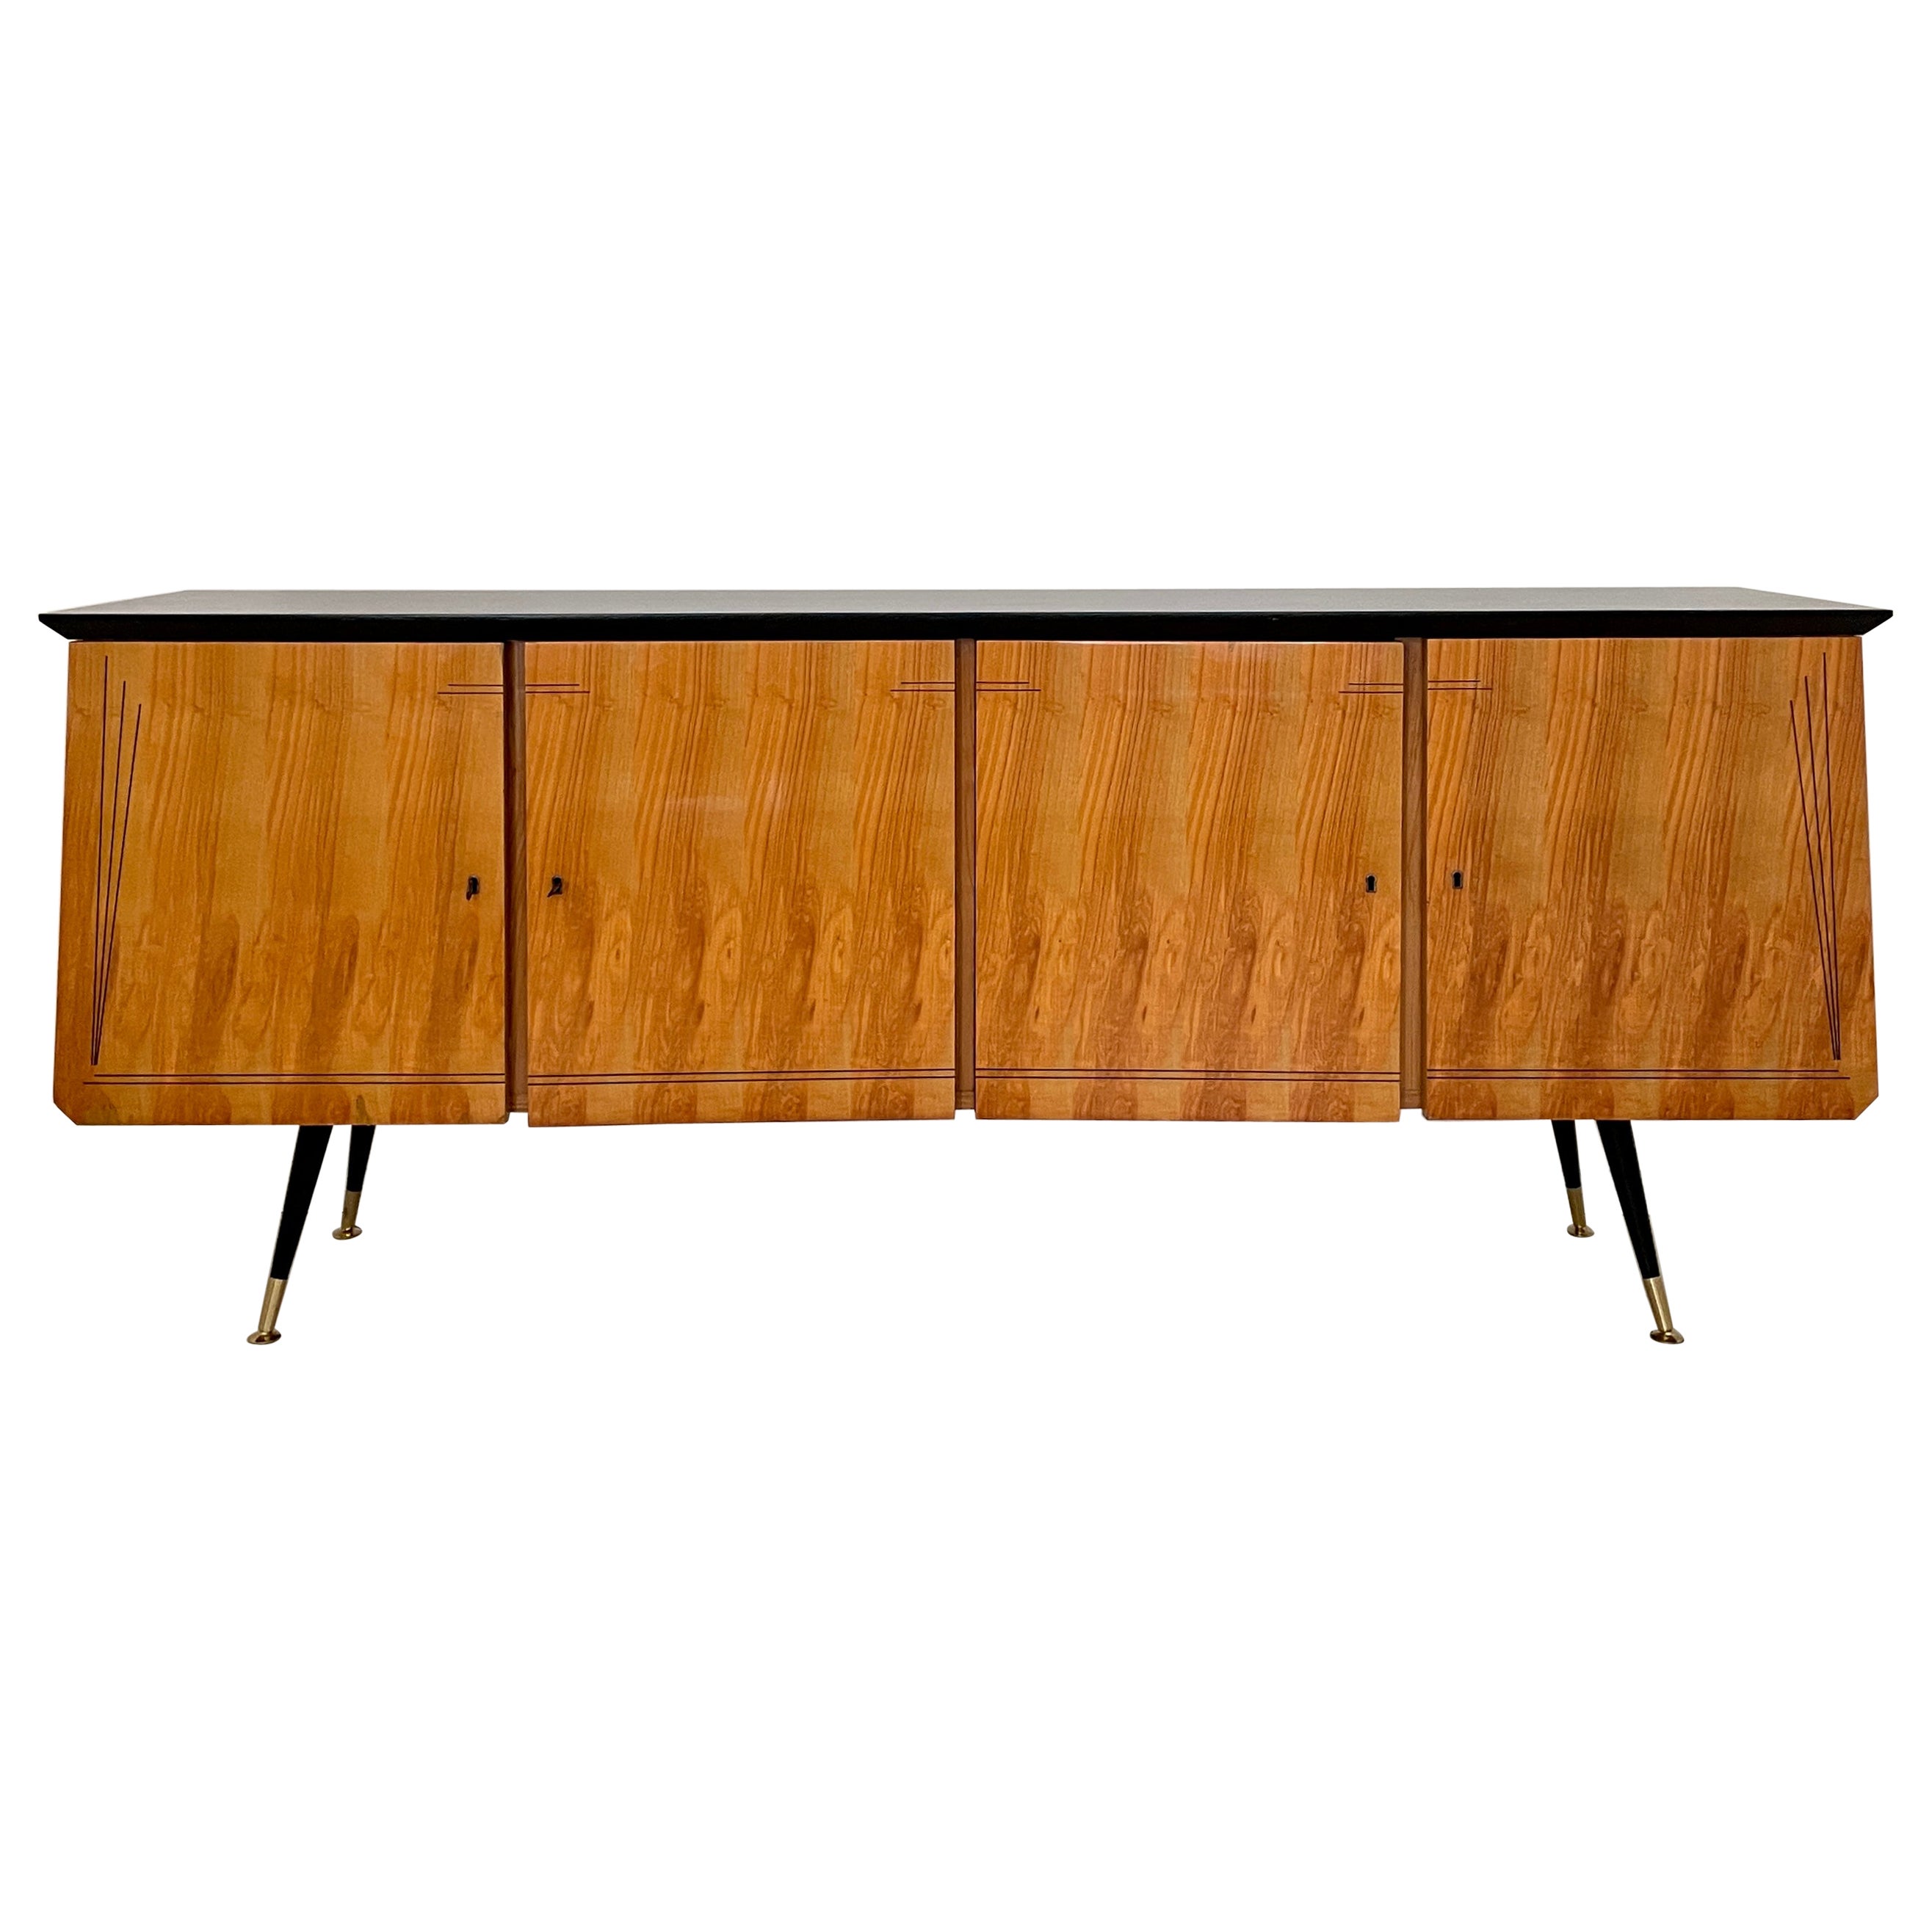 Italian Midcentury Sideboard with 4 Doors in Ash, Black and Brass, Around 1950 For Sale